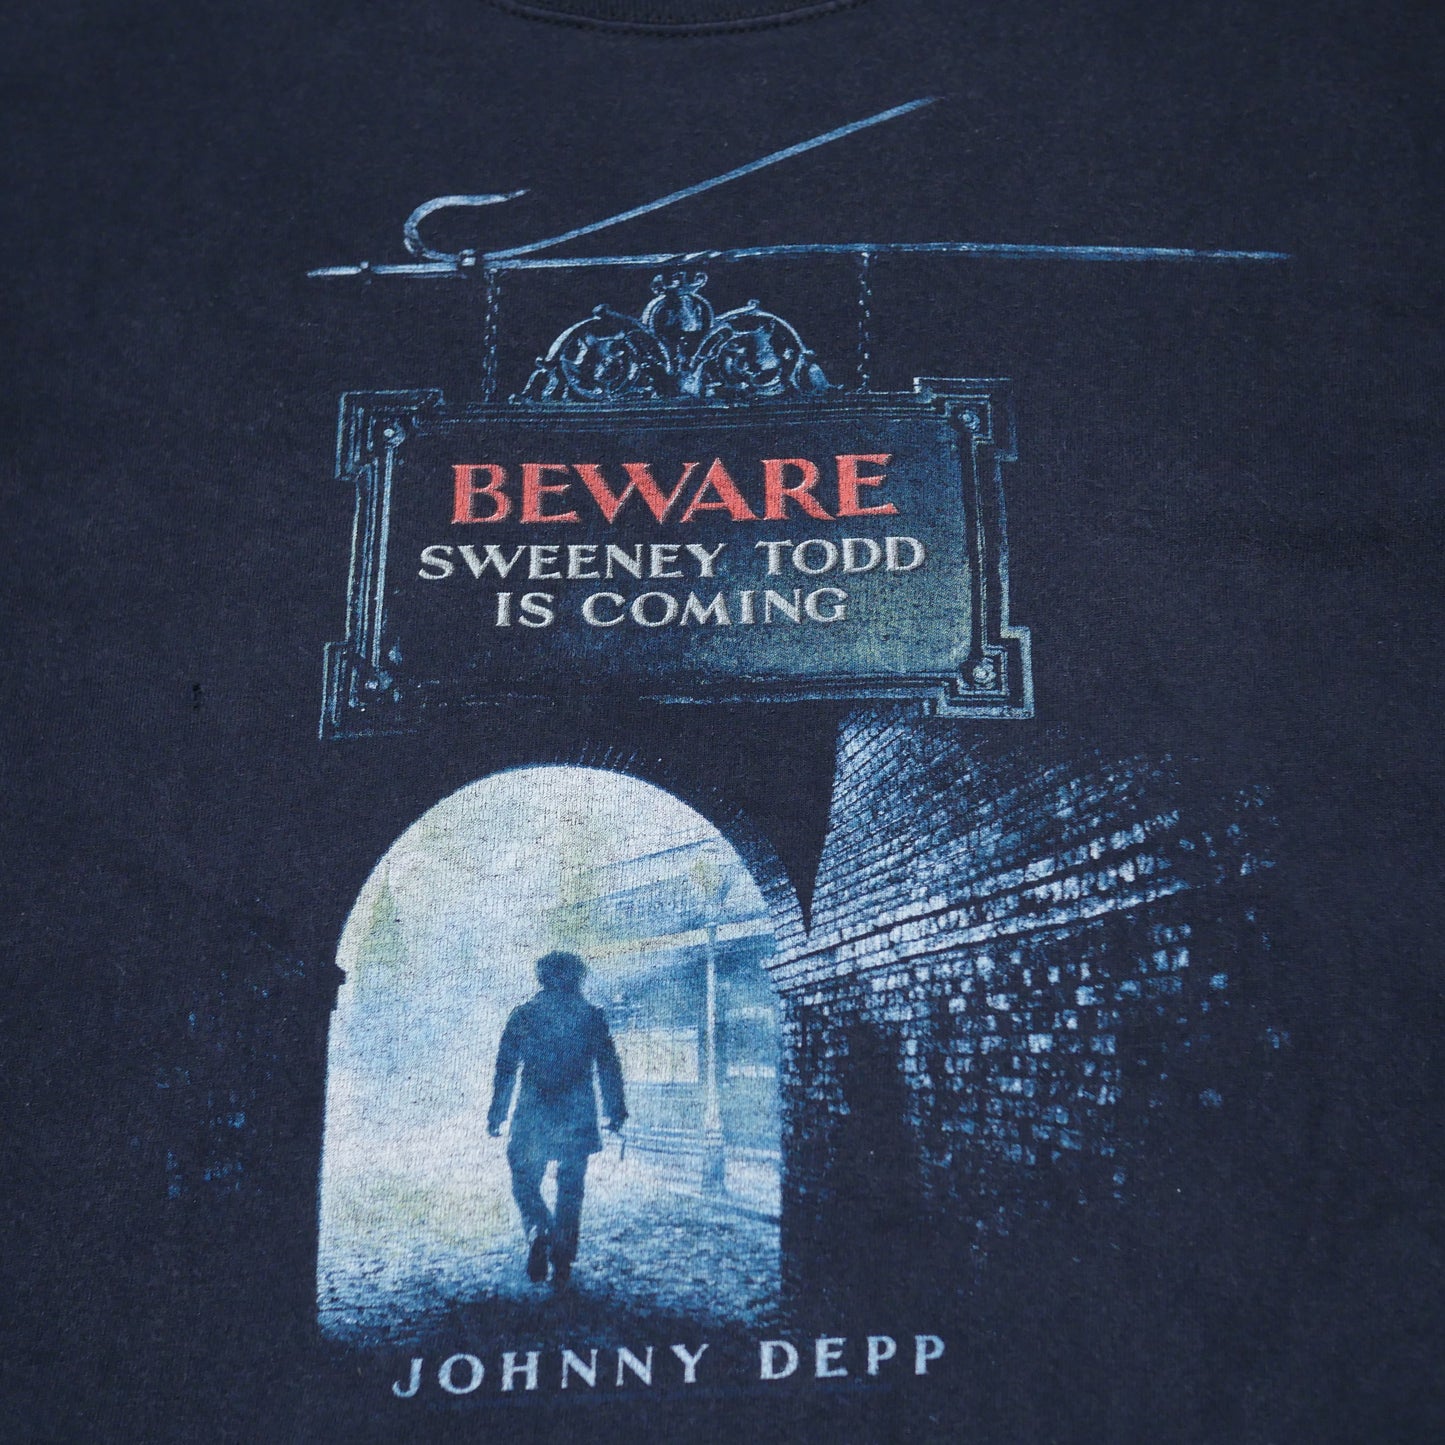 Beware Sweeney Todd is Coming Johnny Depp Movie Promo Shirt - Large